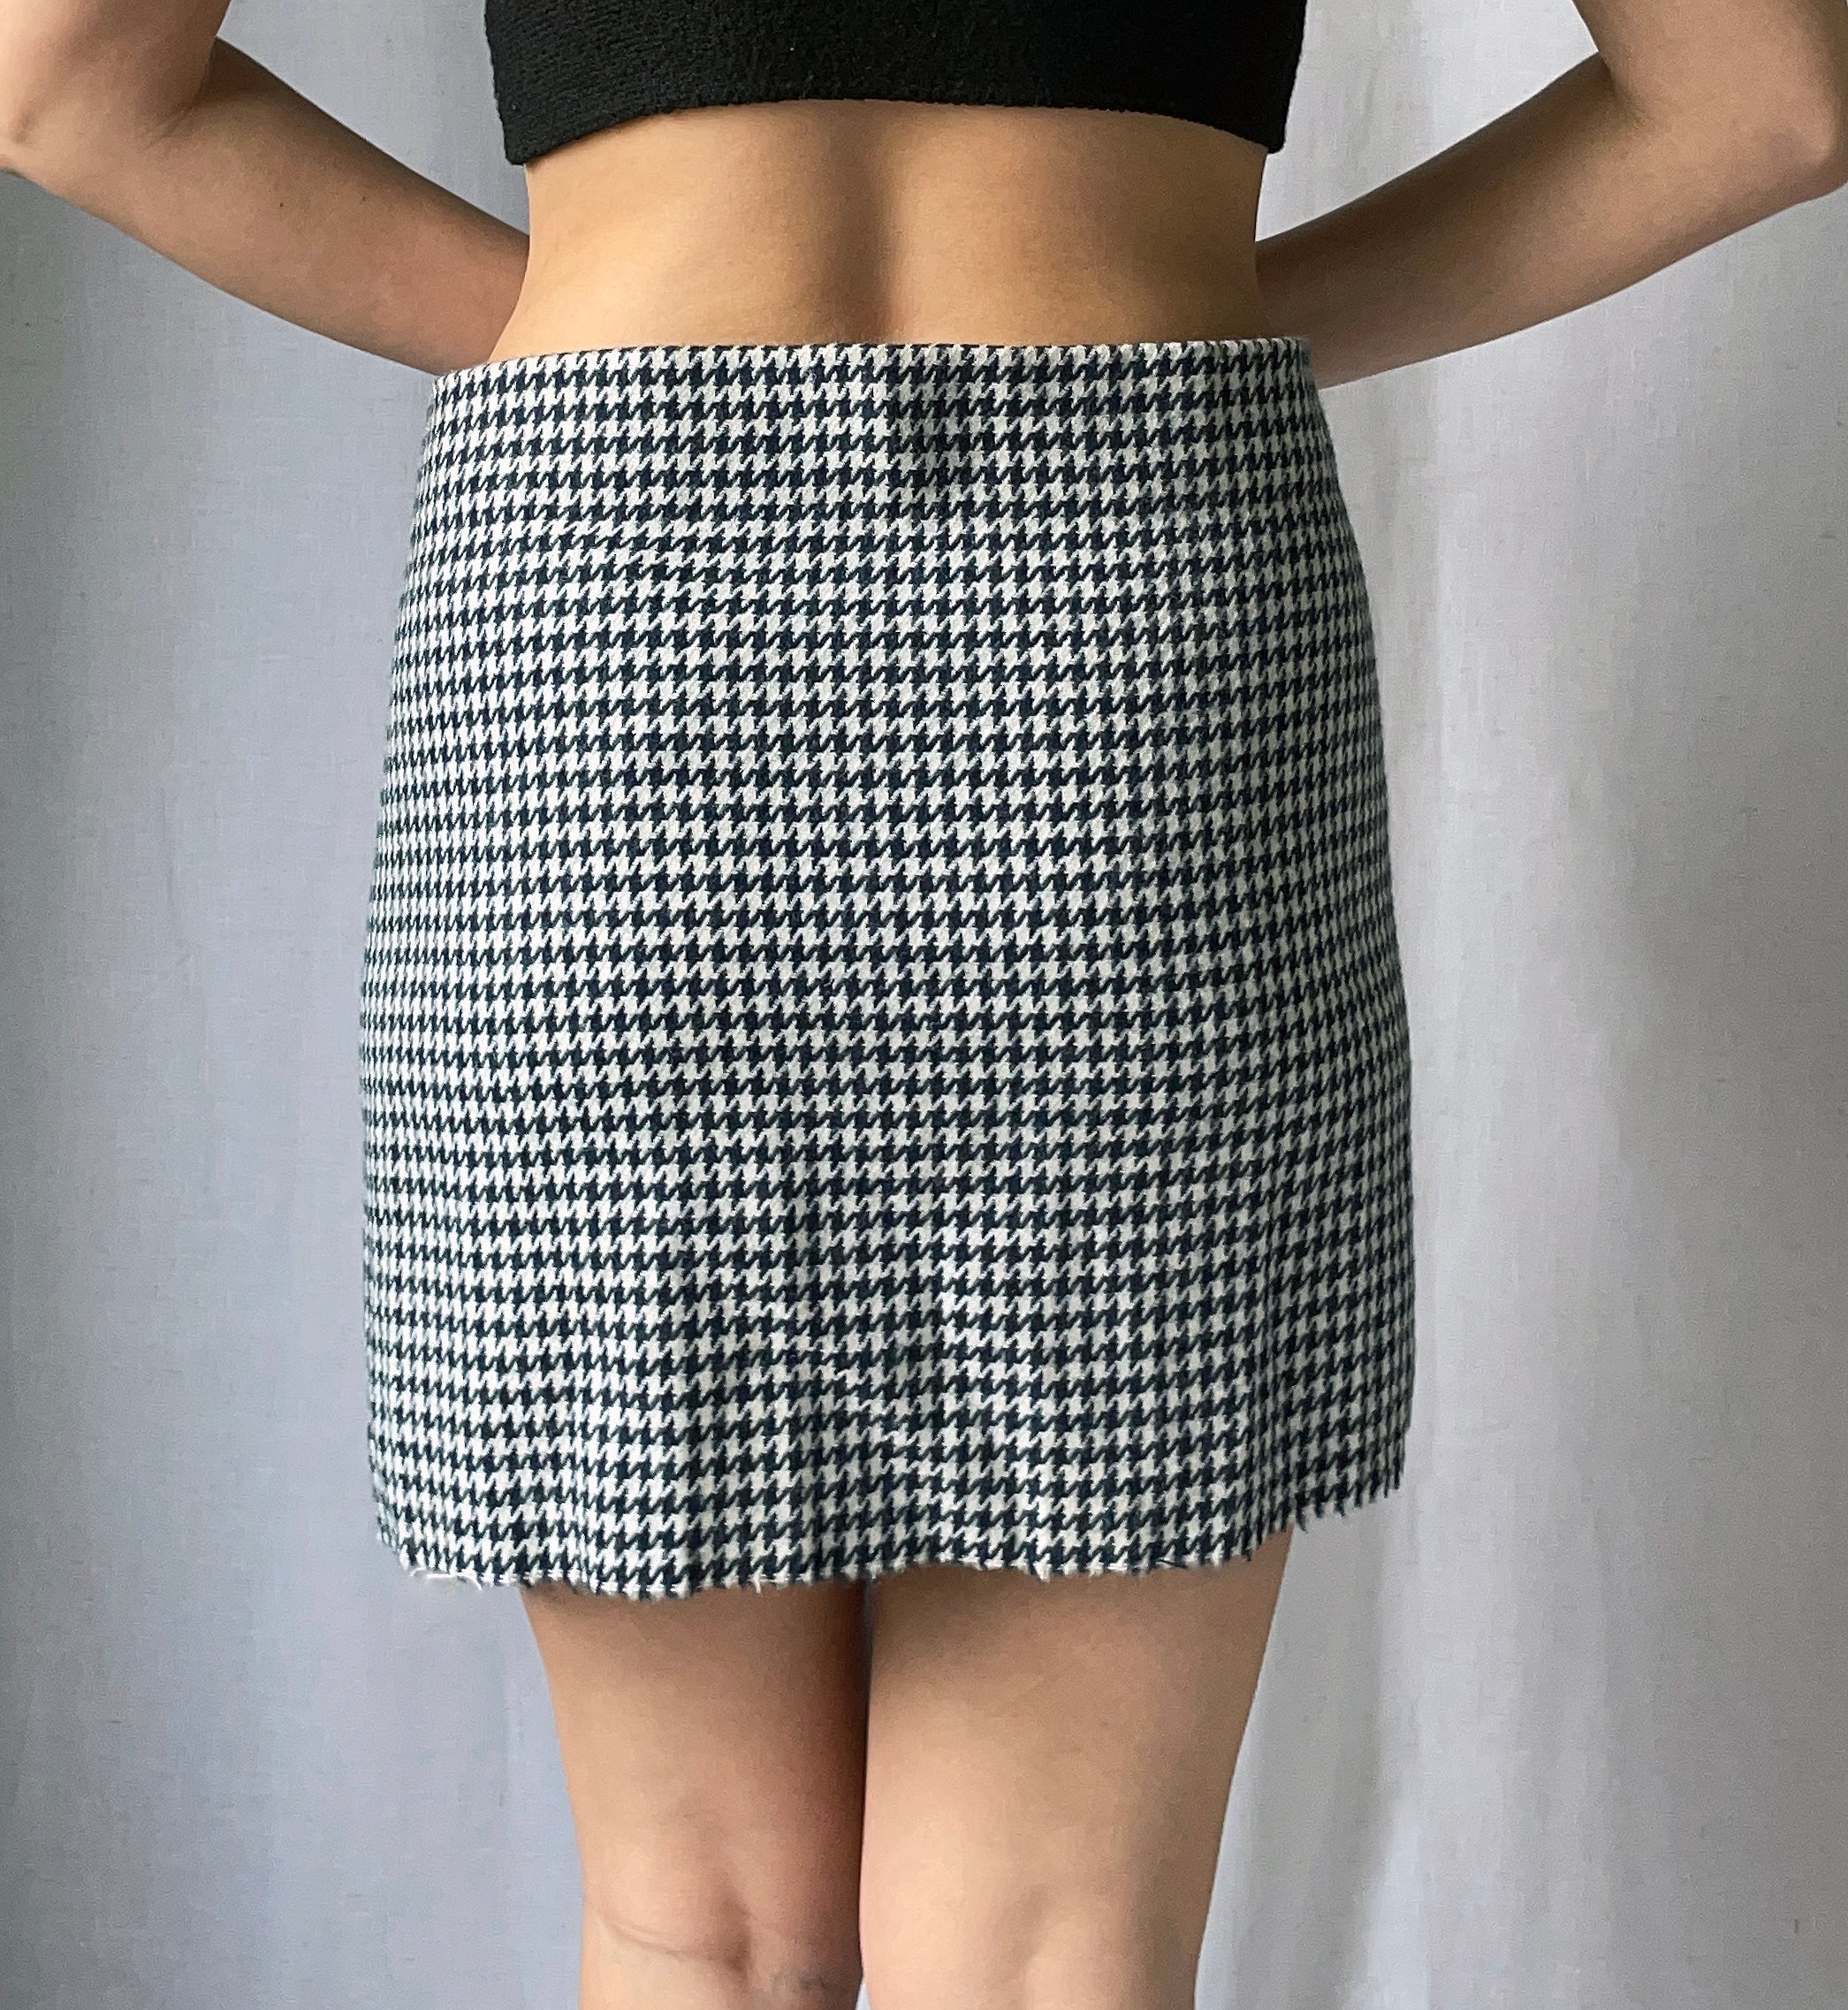 VINTAGE WOOL WRAP SKIRT WITH SAFETY PIN CLOSURE | XS-M – Very Breezy